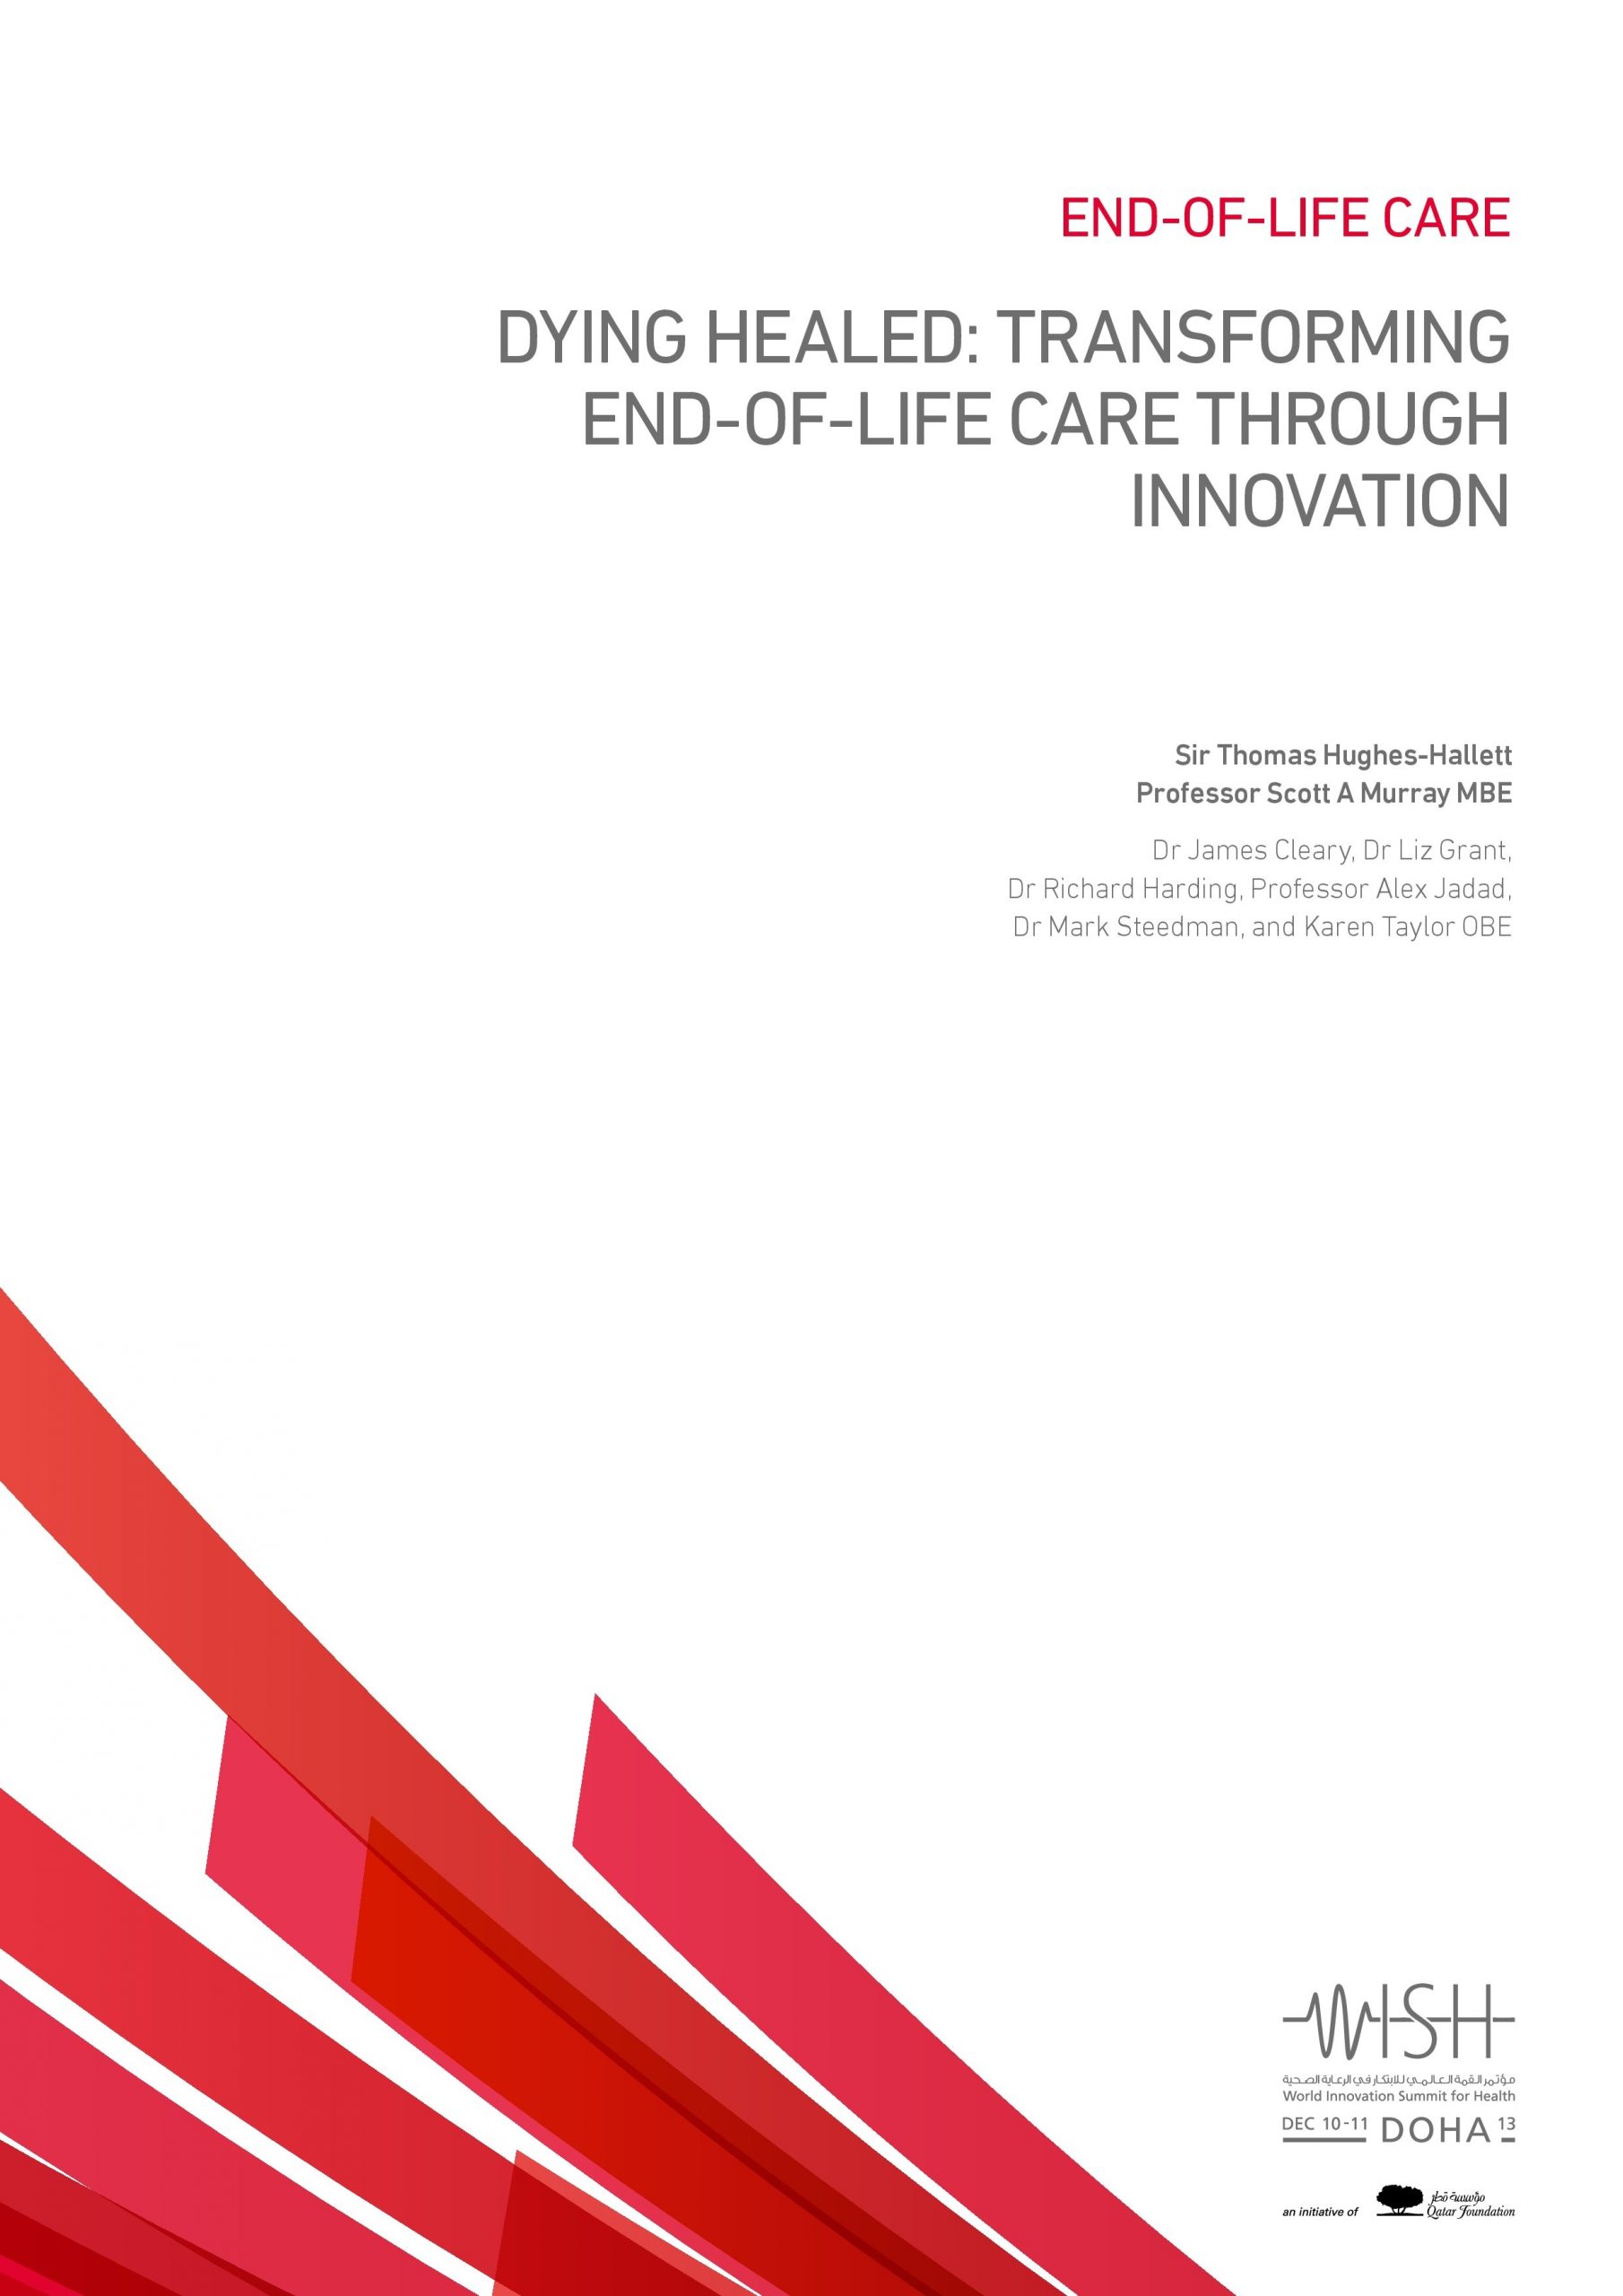 Dying Healed: Transforming End-Of-Life Care through Innovation